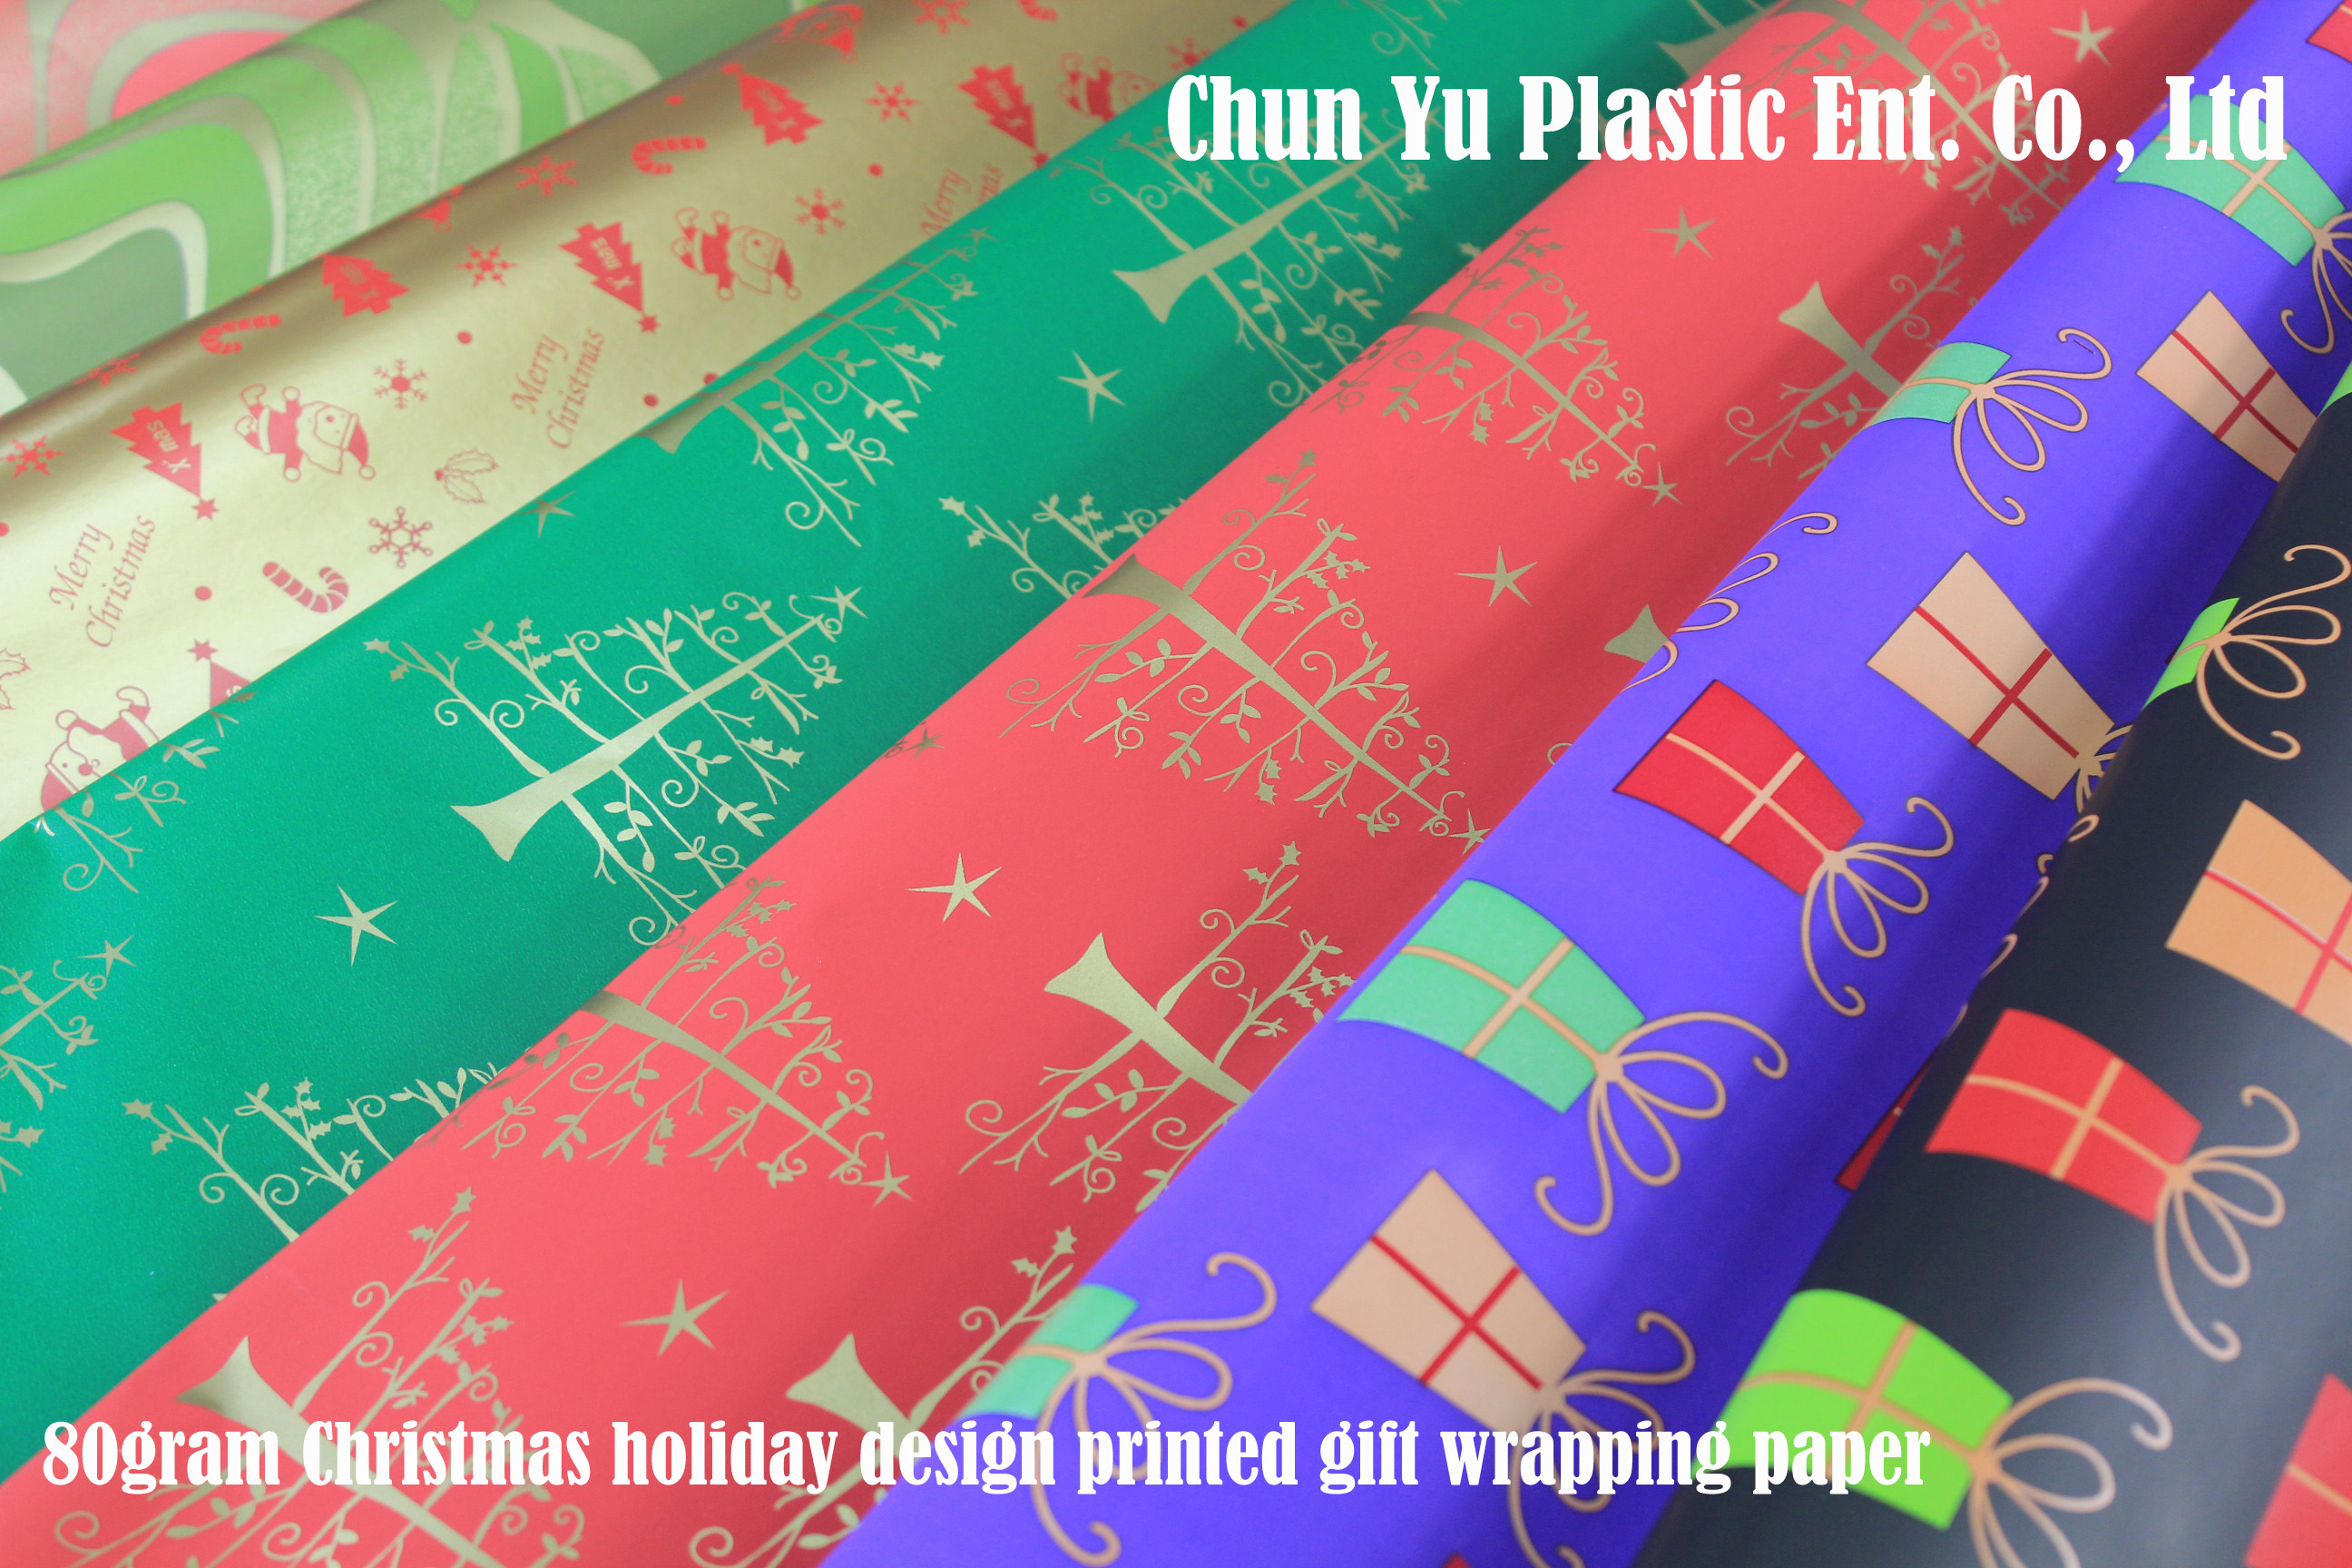 Gift wrapping paper printed with Christmas design for your gifts in holiday season